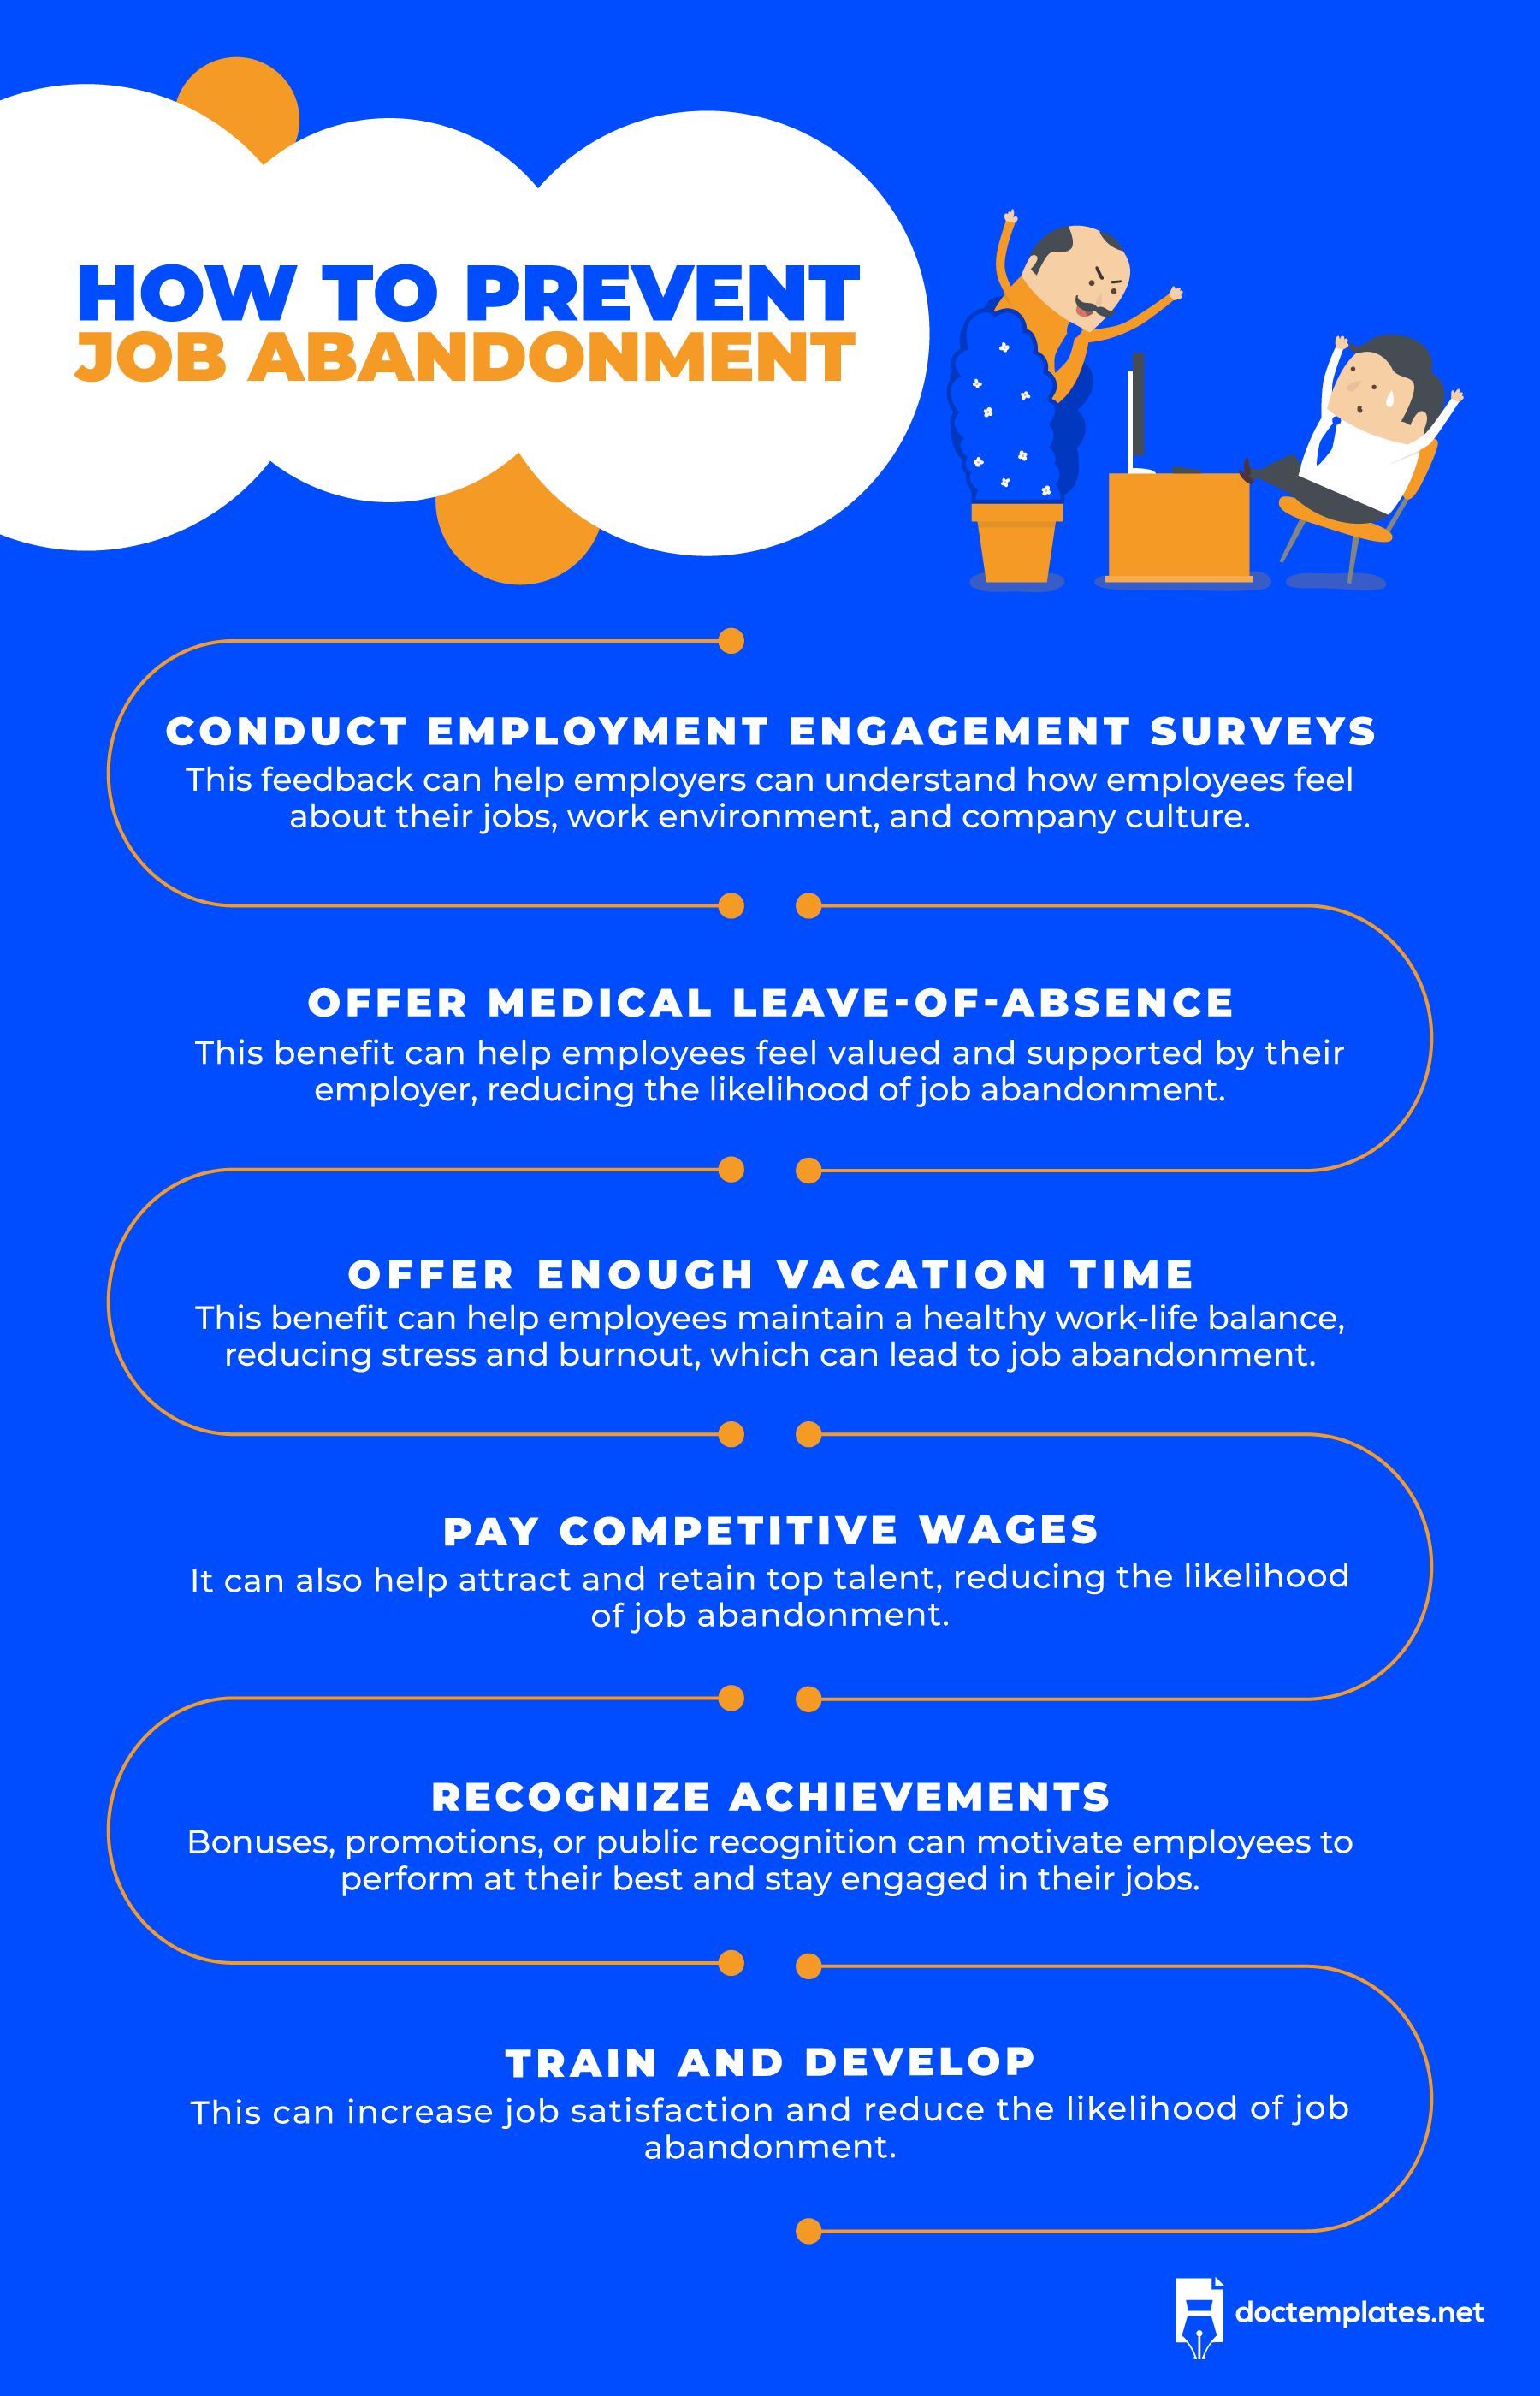 This infographic is about prevention of job abandonment.